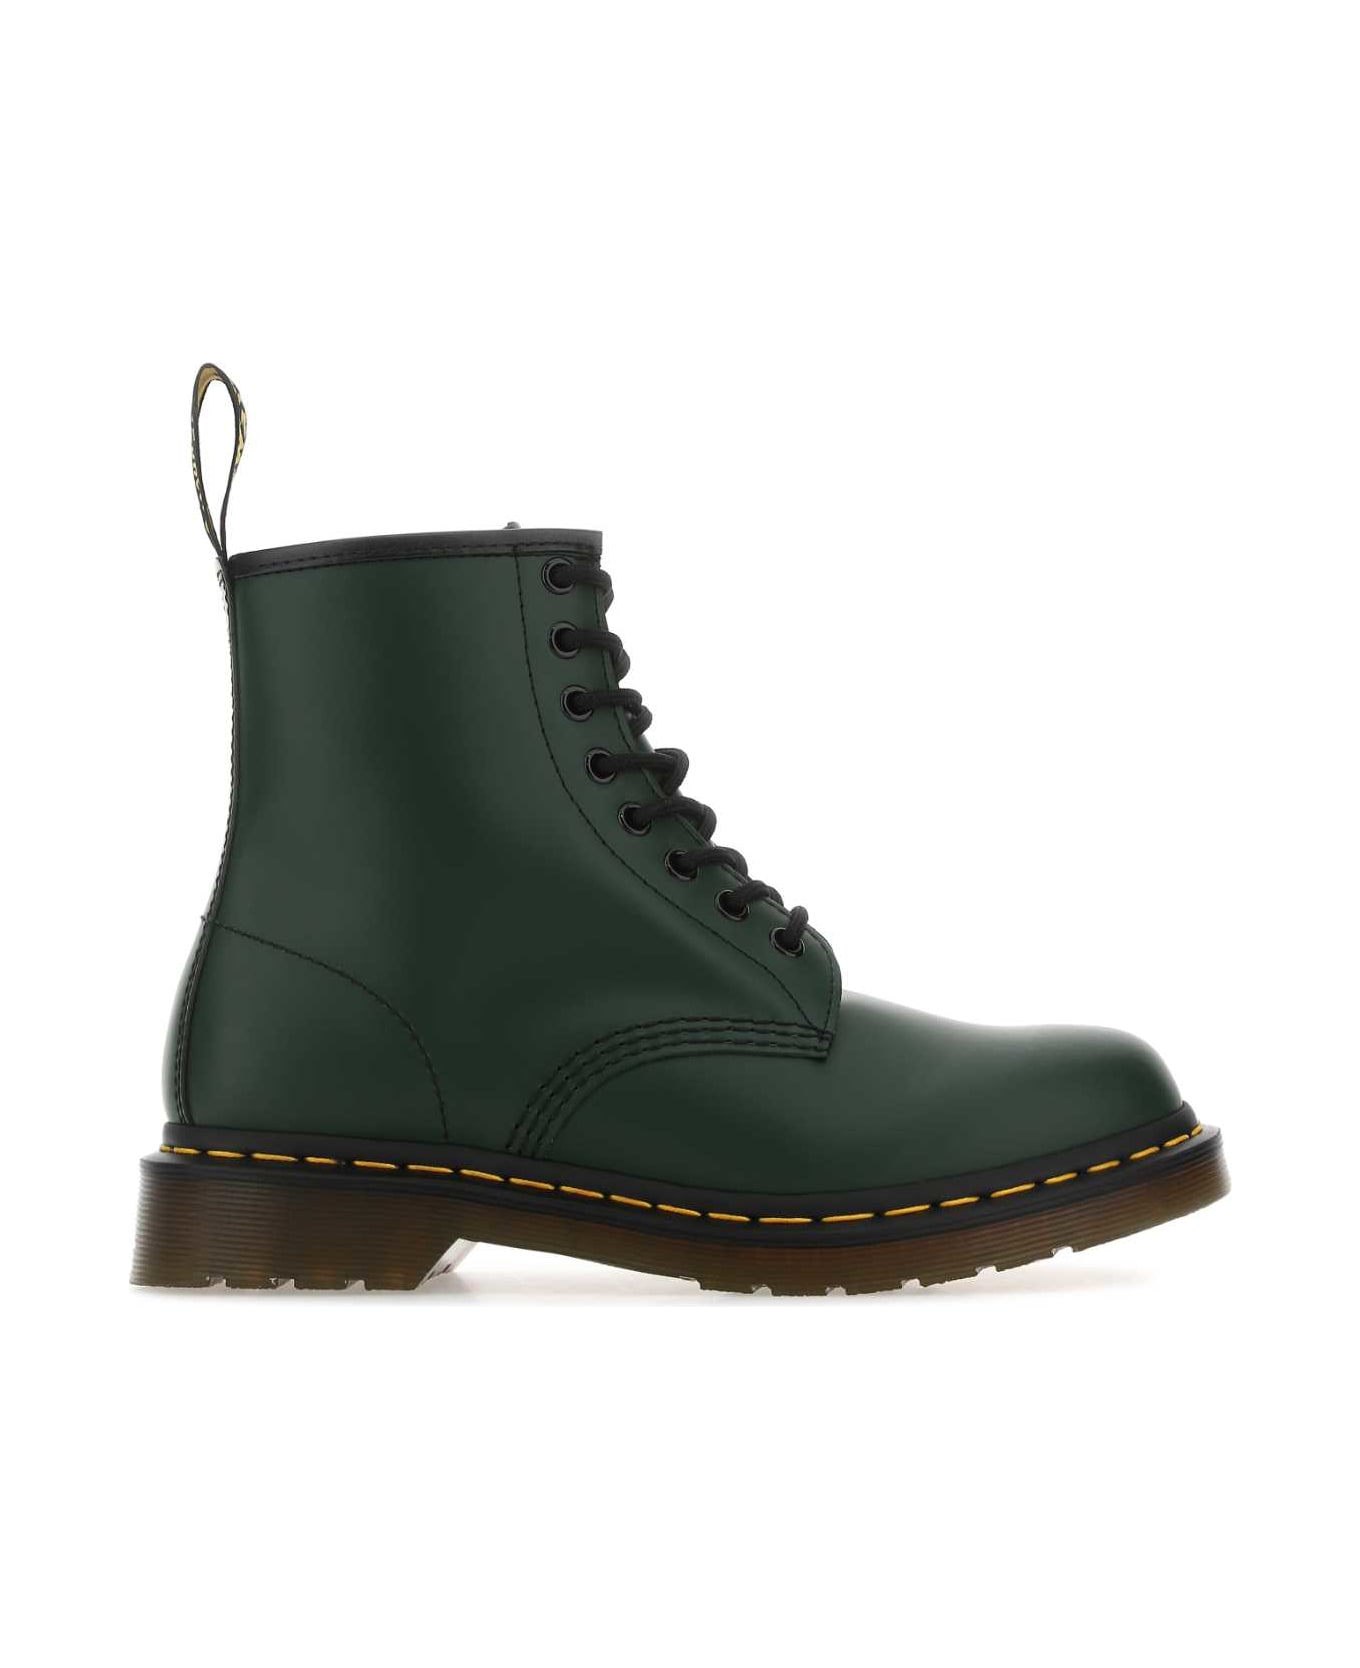 Dr. Martens Bottle Green Leather 1460 Ankle Boots - GreenSmooth name:458